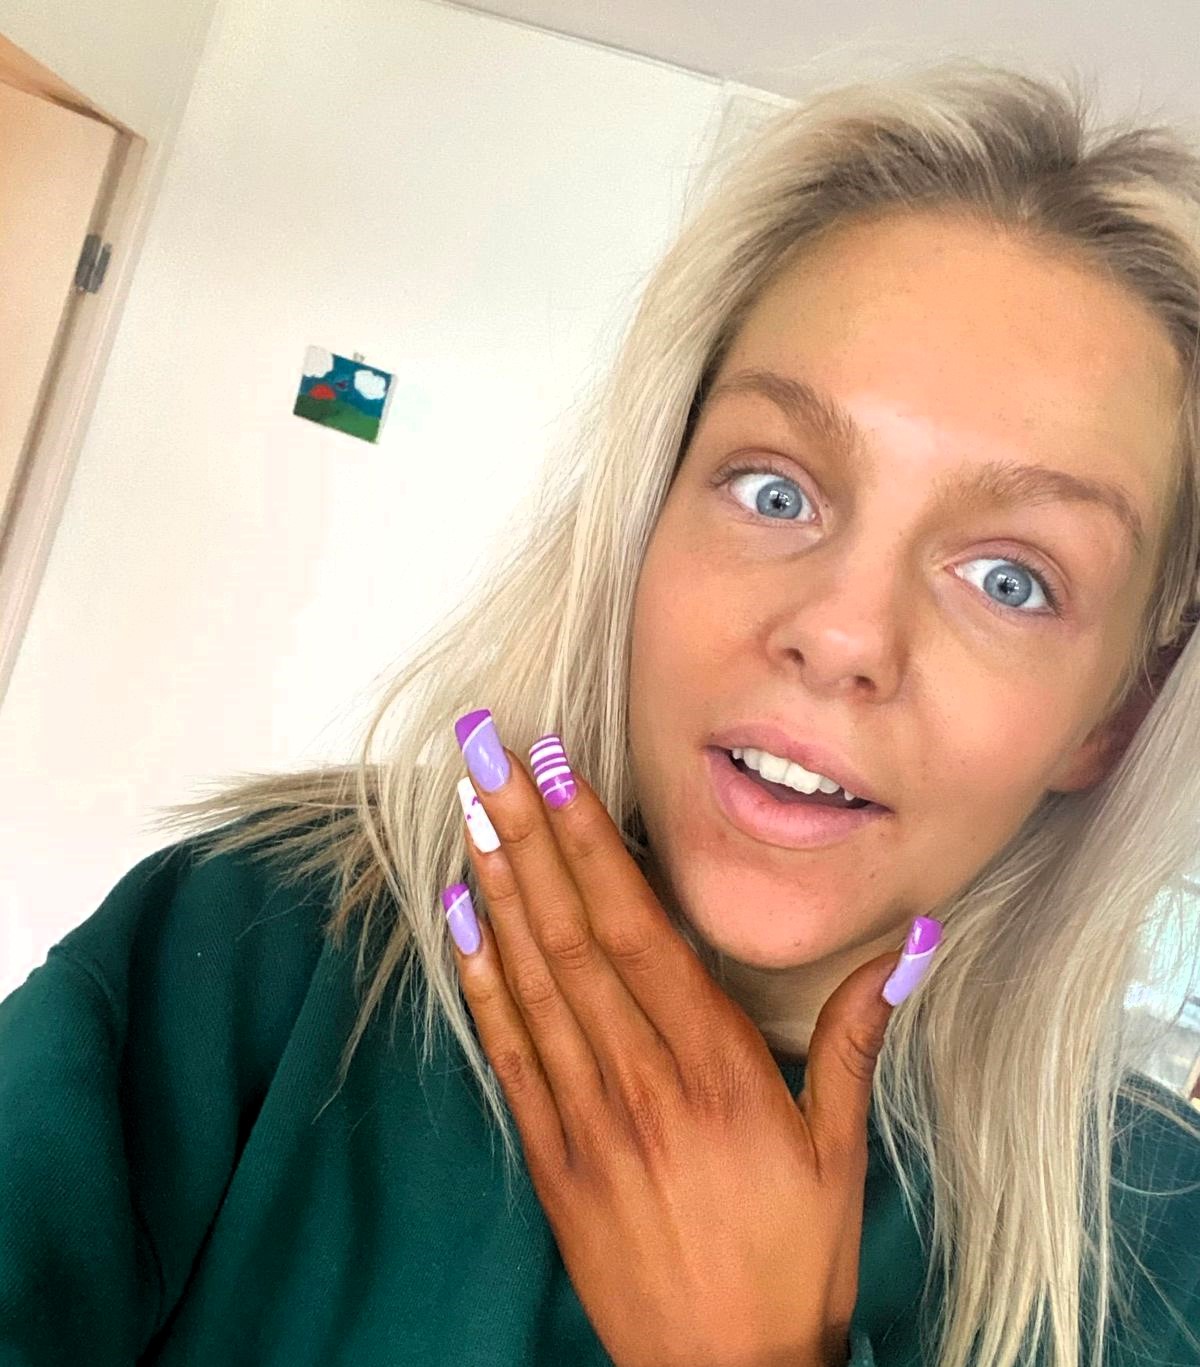 A woman turned bright orange after a spray tan mishap, leading to hilarious comparisons to cheese Doritos. Iris Owen from London took it in stride and shared her story on TikTok.